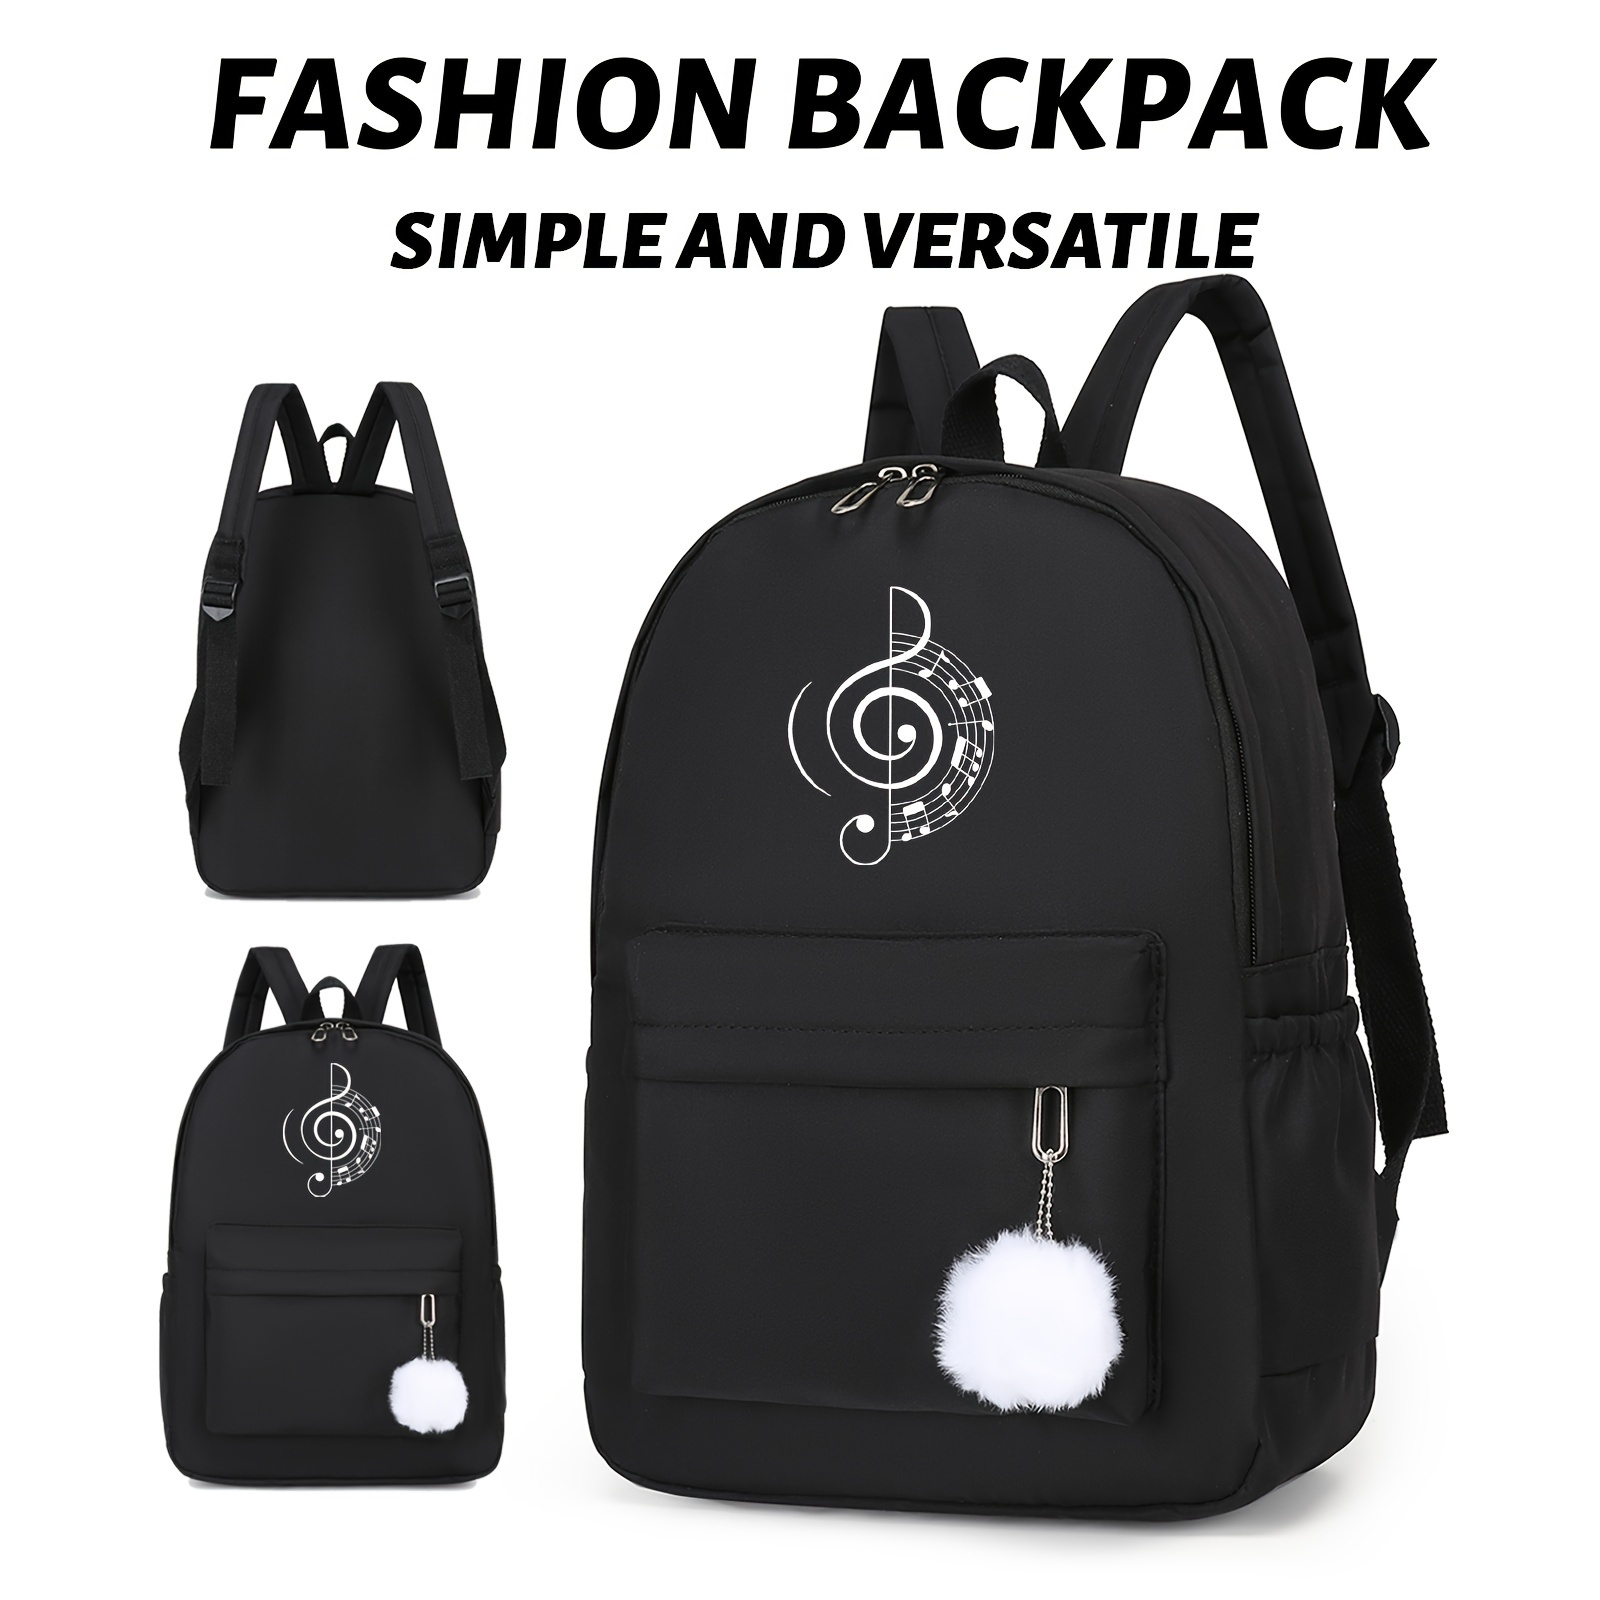 

Music Print Stylish And Versatile Black Backpack, Perfect For Travel With Its Large Capacity, Multi Functional Backpack, Suitable For Women And Men, Can Be Used For Various Purposes